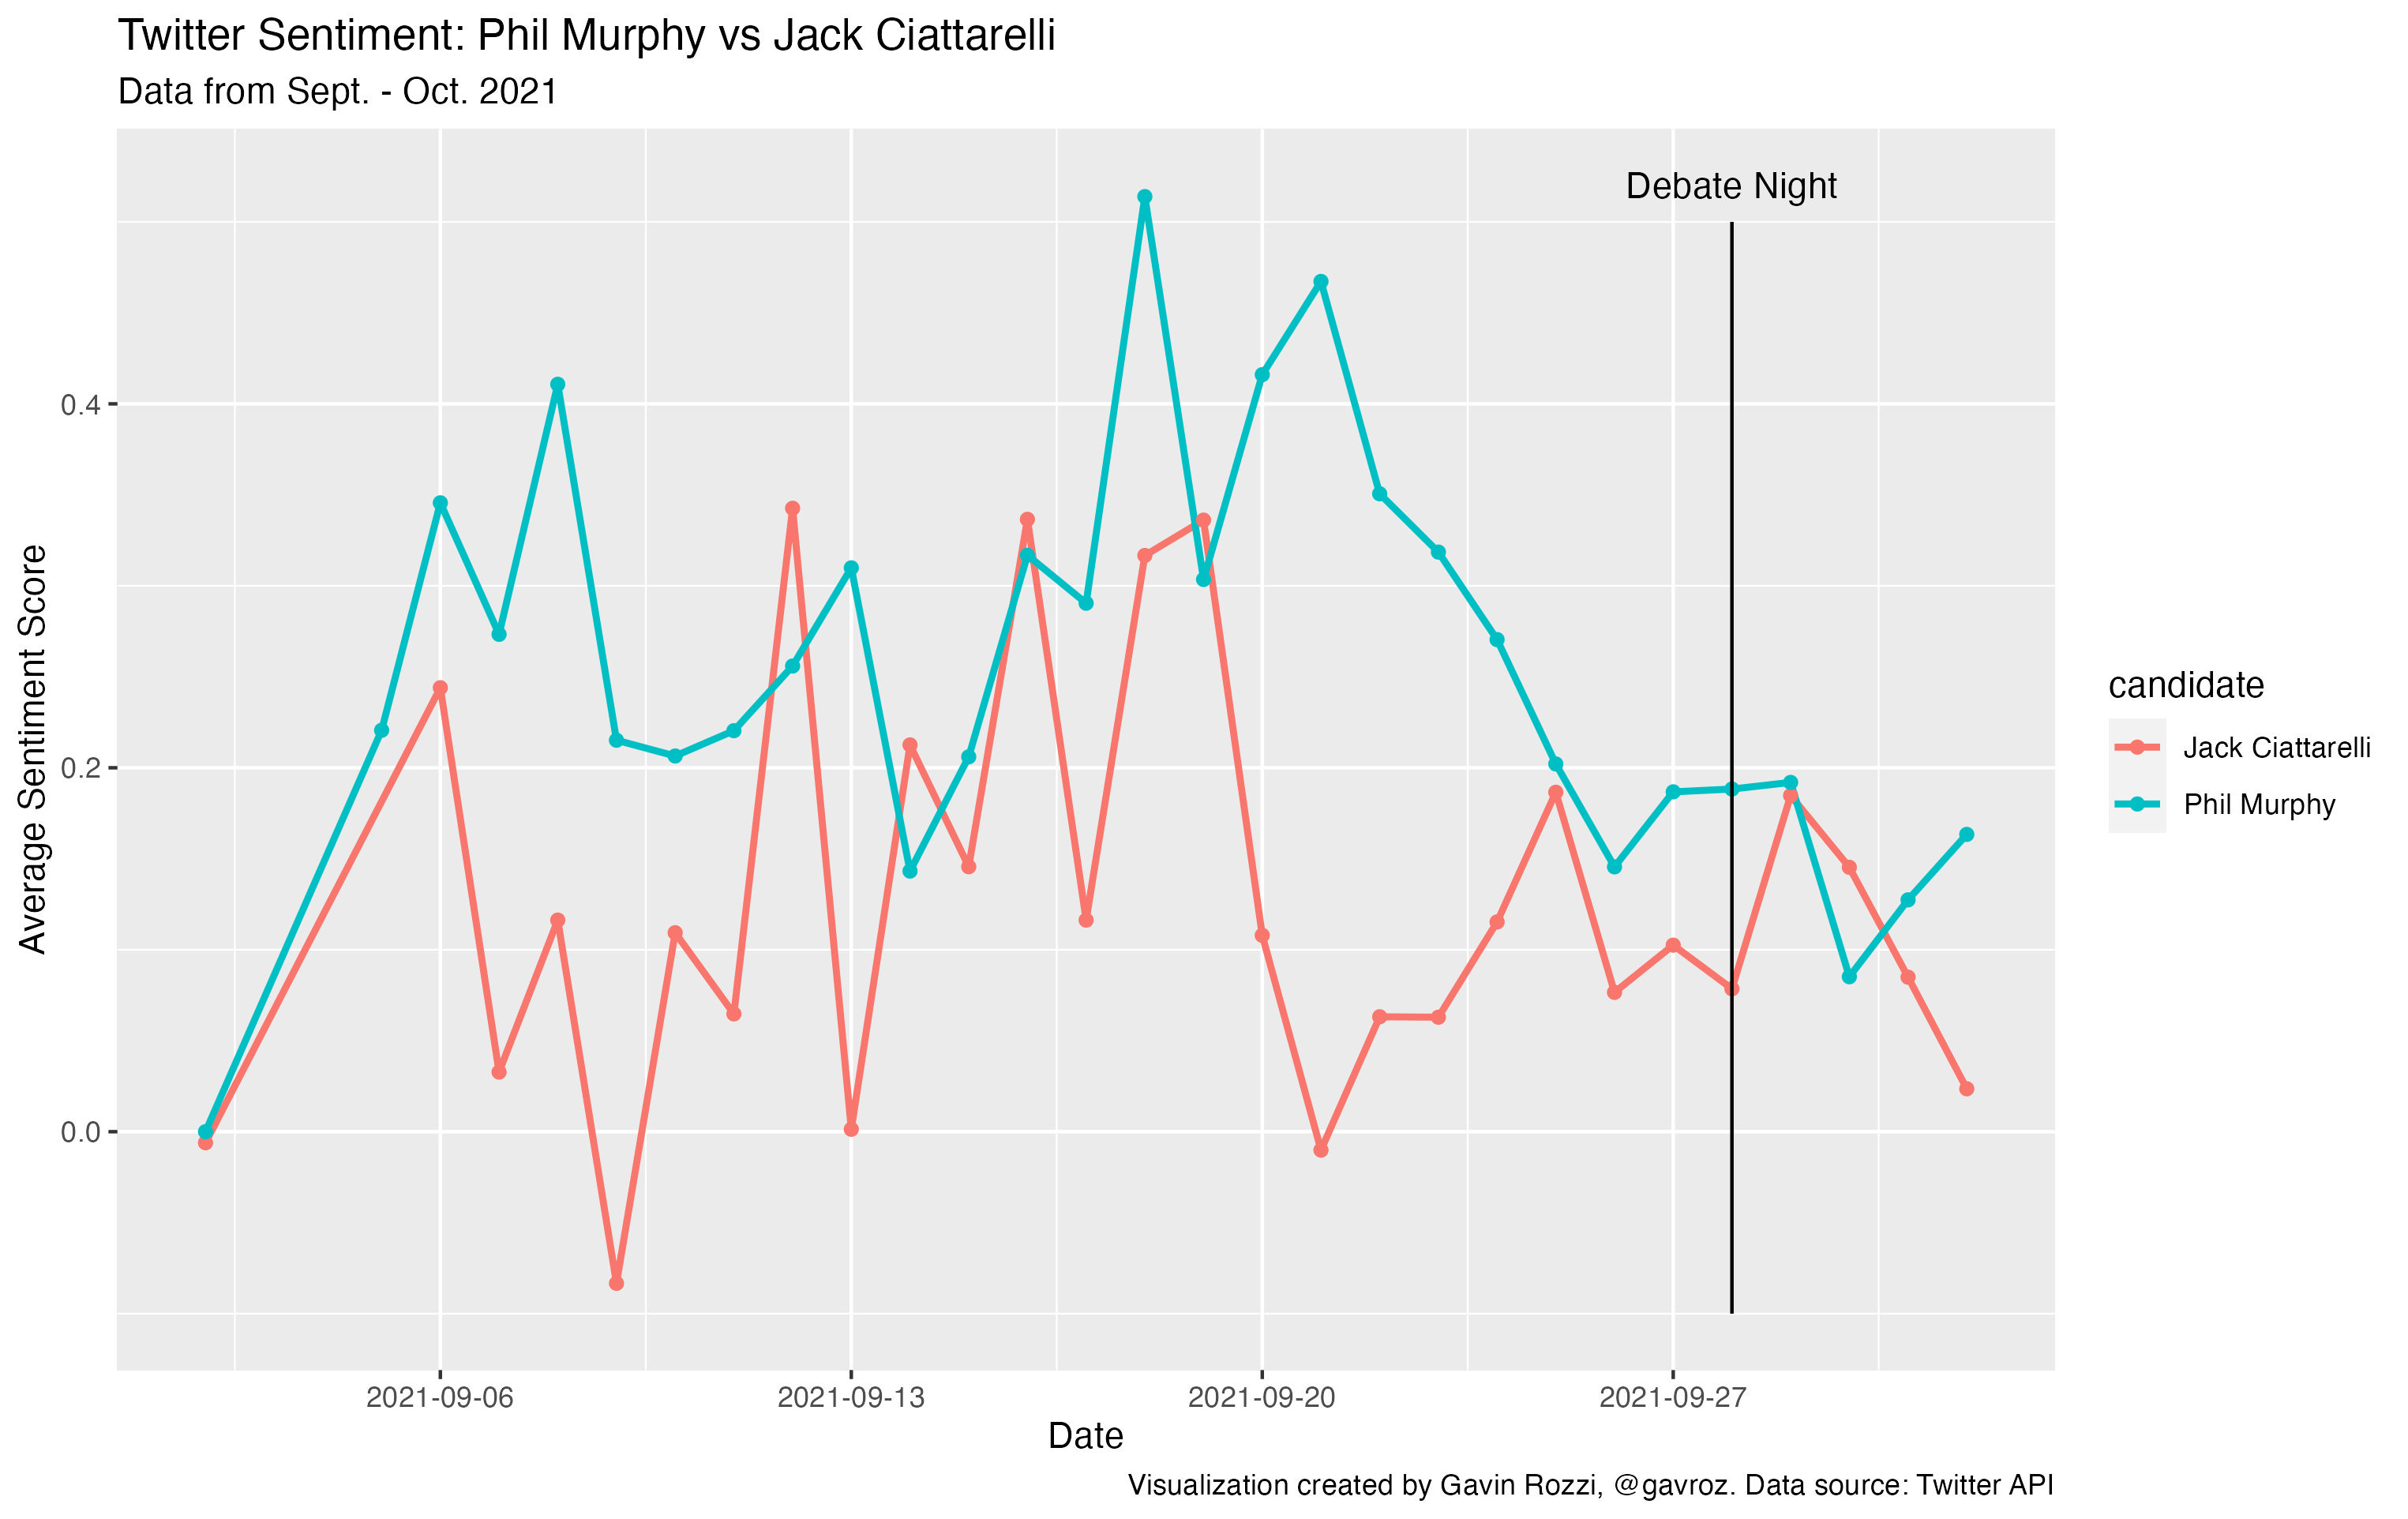 Figure 2: Average daily sentiment for Murphy and Ciattarelli Twitter Accounts